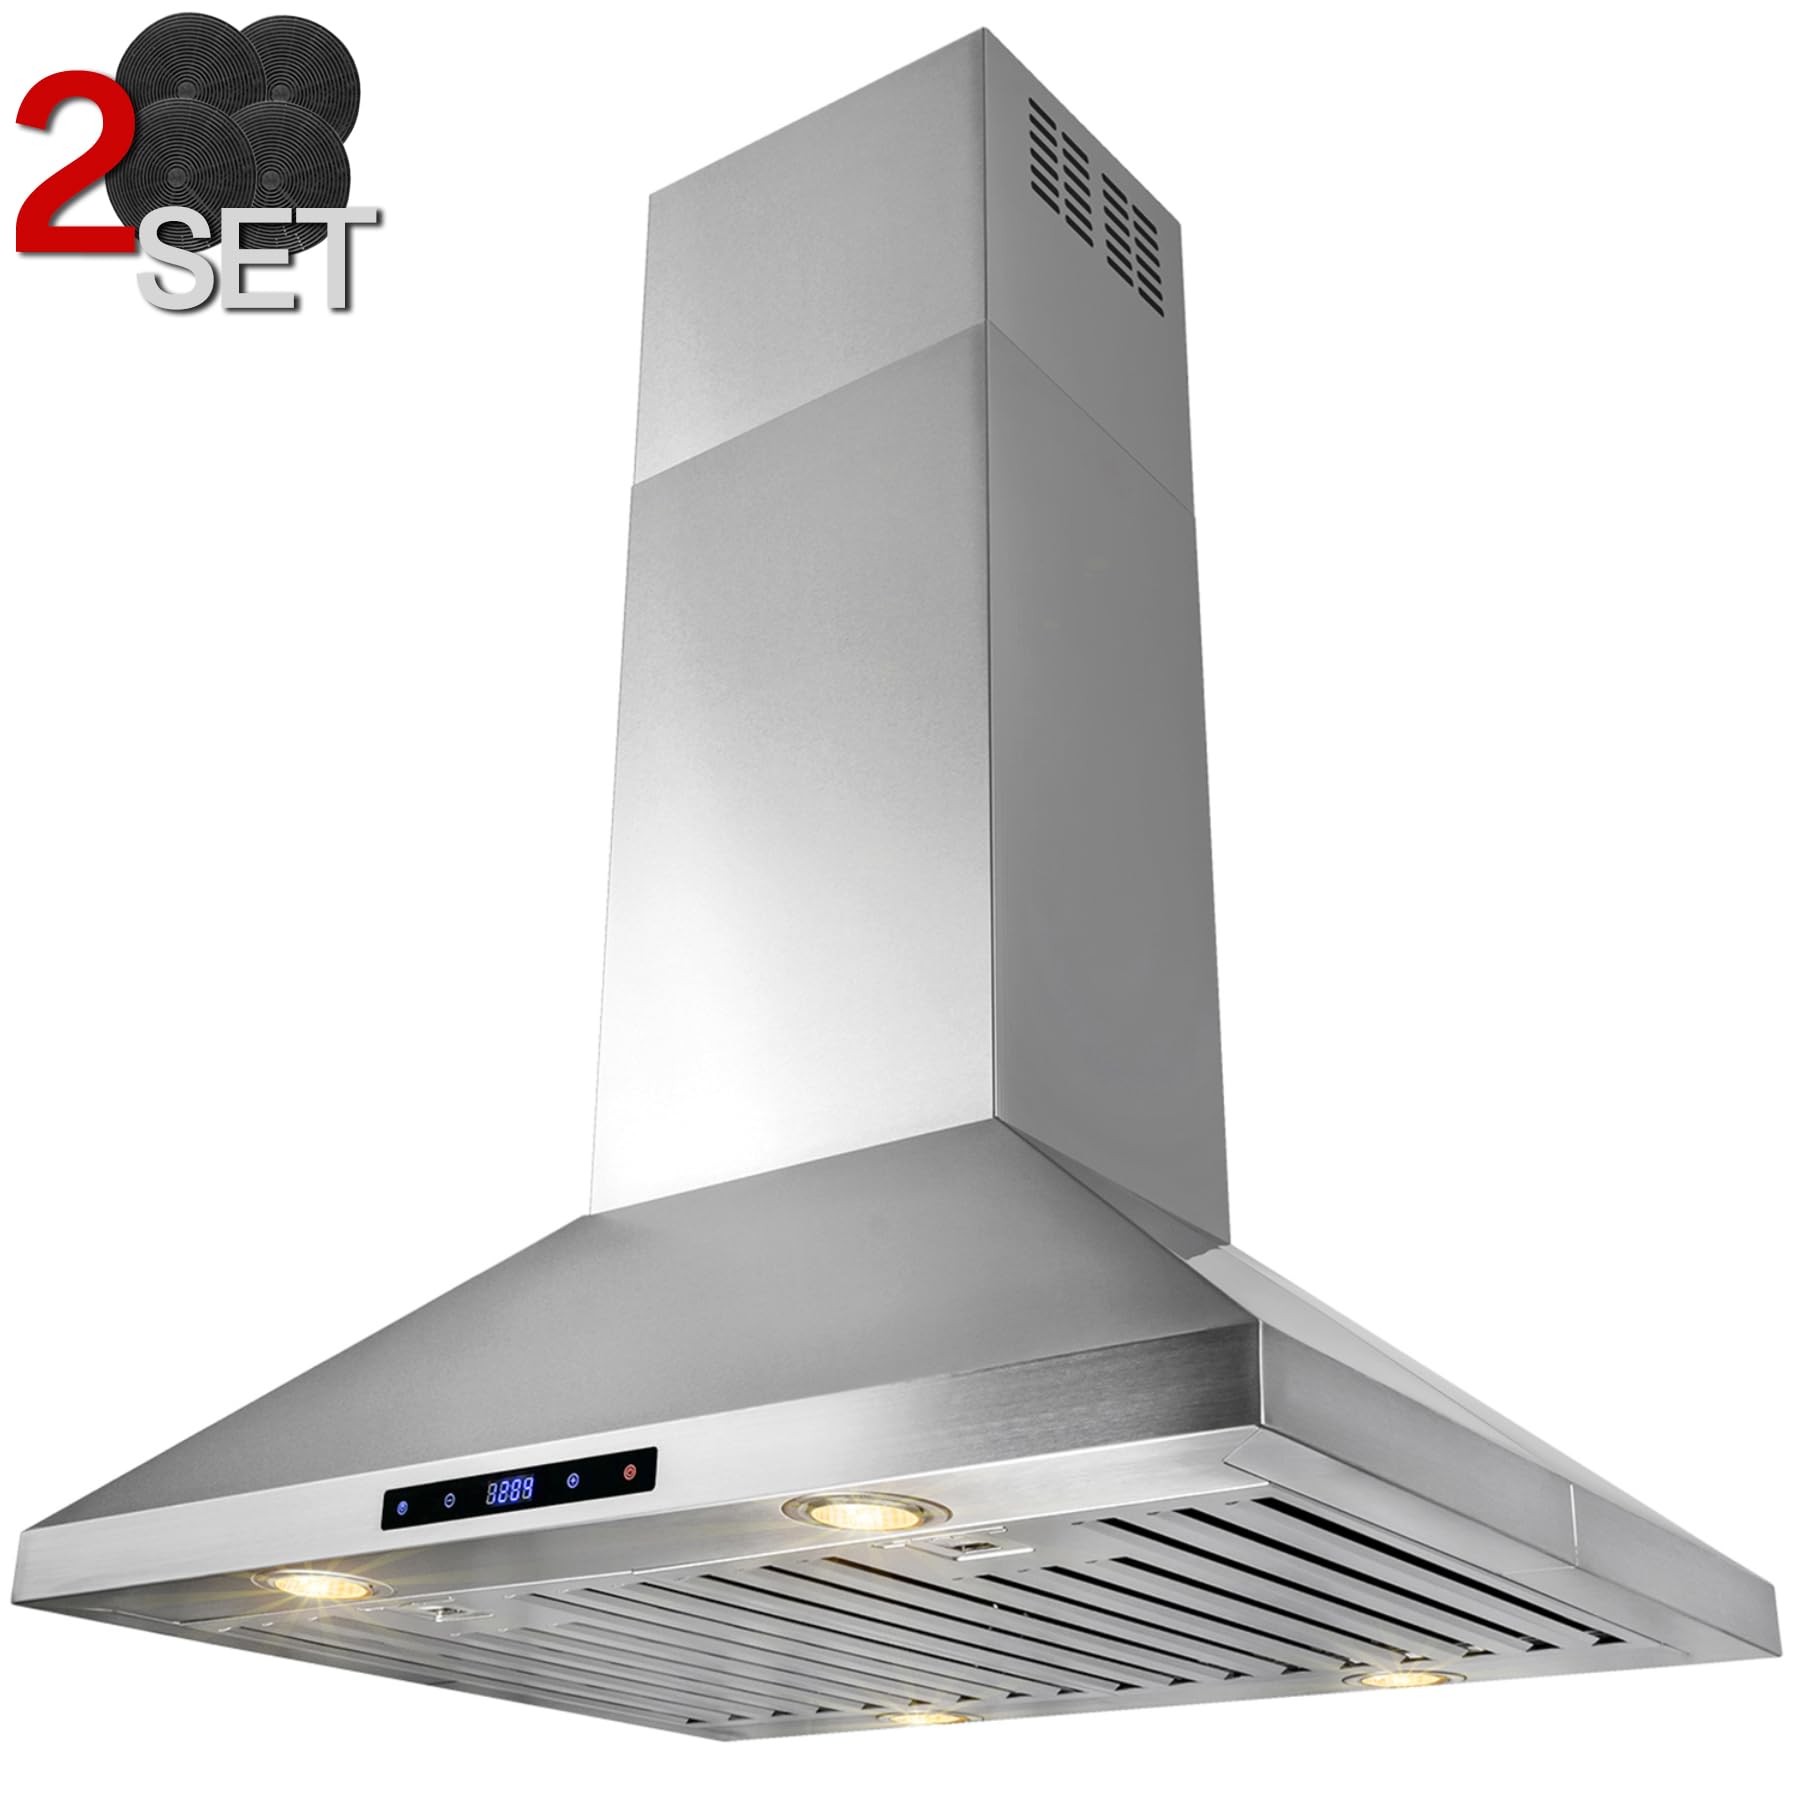 AKDY 30 in. Island Mount Range Hood, 4-Speed Fan and LED Lights in Stainless Steel, Convertible Range Hood Ducted to Ductless with 2-Sets of Carbon Filters